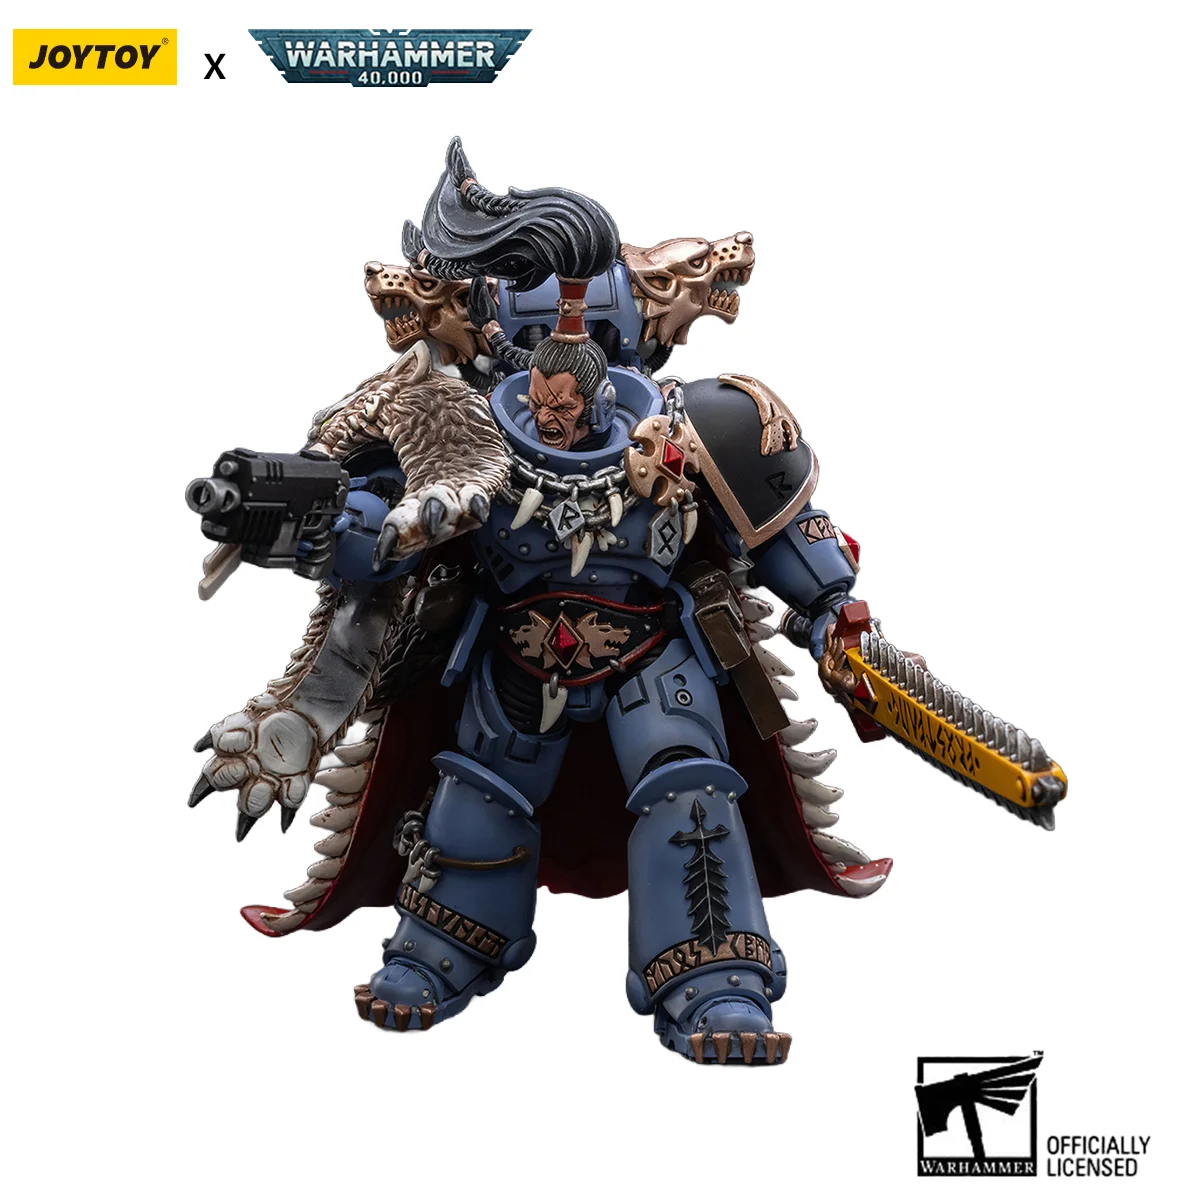 

[Pre-Order] 1/18 Collectible Action Figure JOYTOY Warhammer 40K Space Wolves Ragnar Blackmane Model Perfect for Display or Gifts